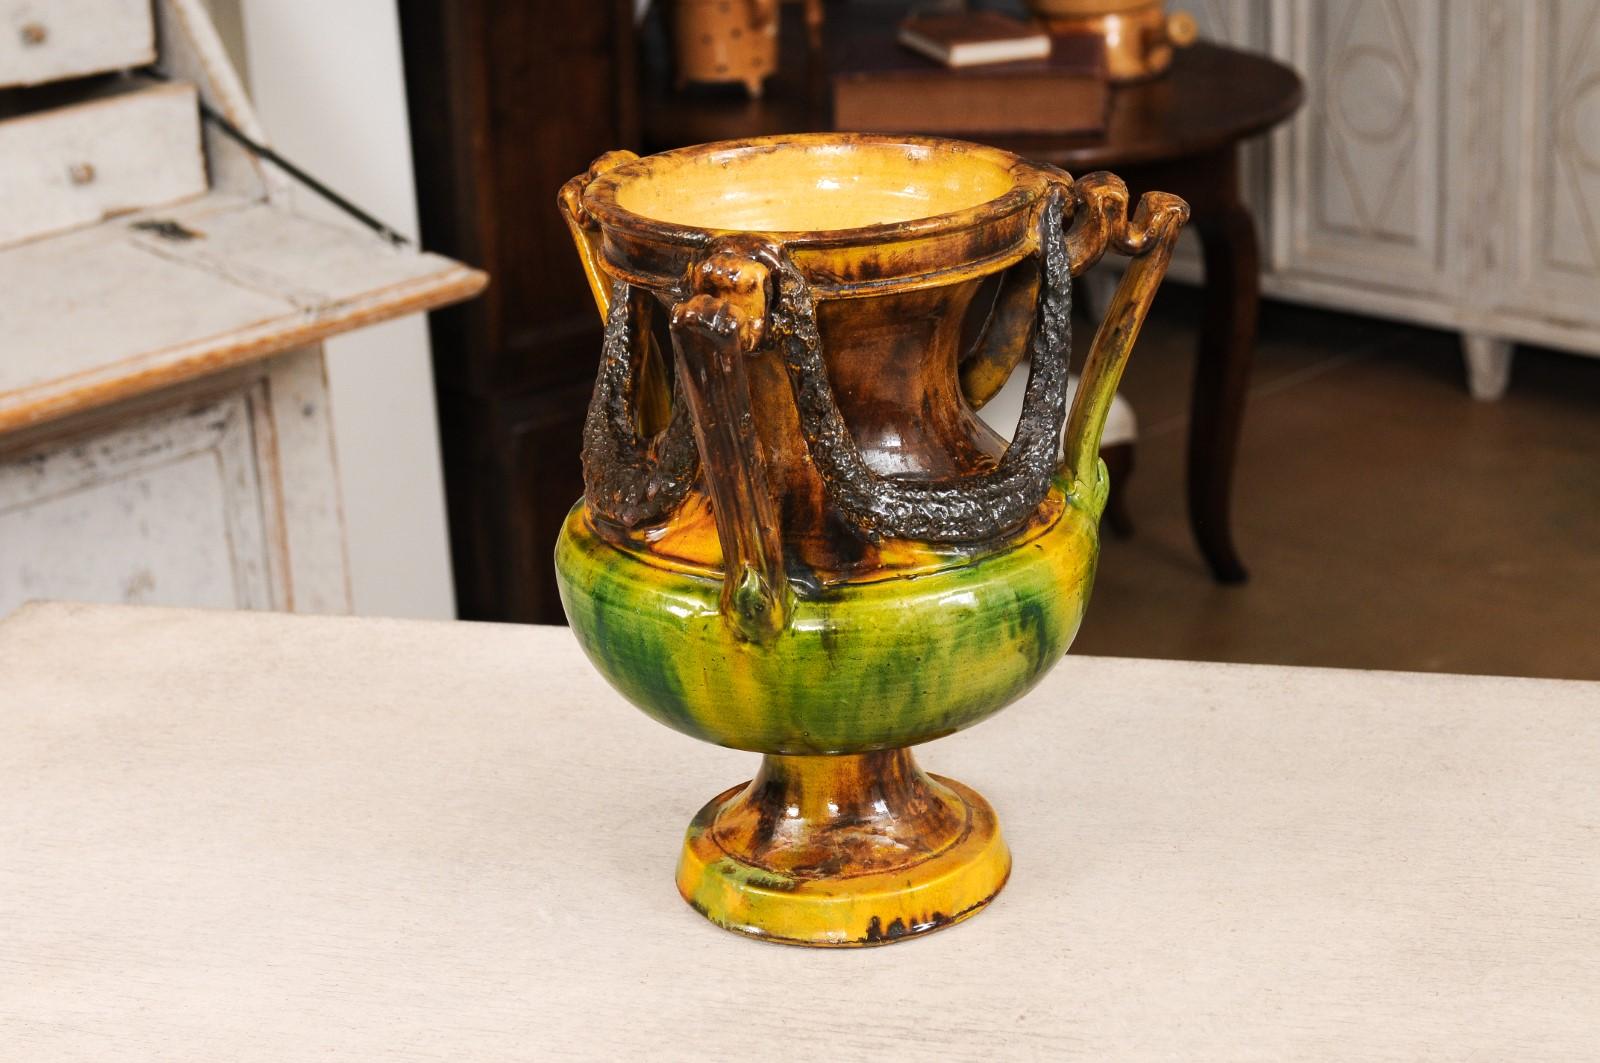 French Classical 19th Century Anduze Multi-Colored Glazed Vase with Swag Motifs For Sale 5